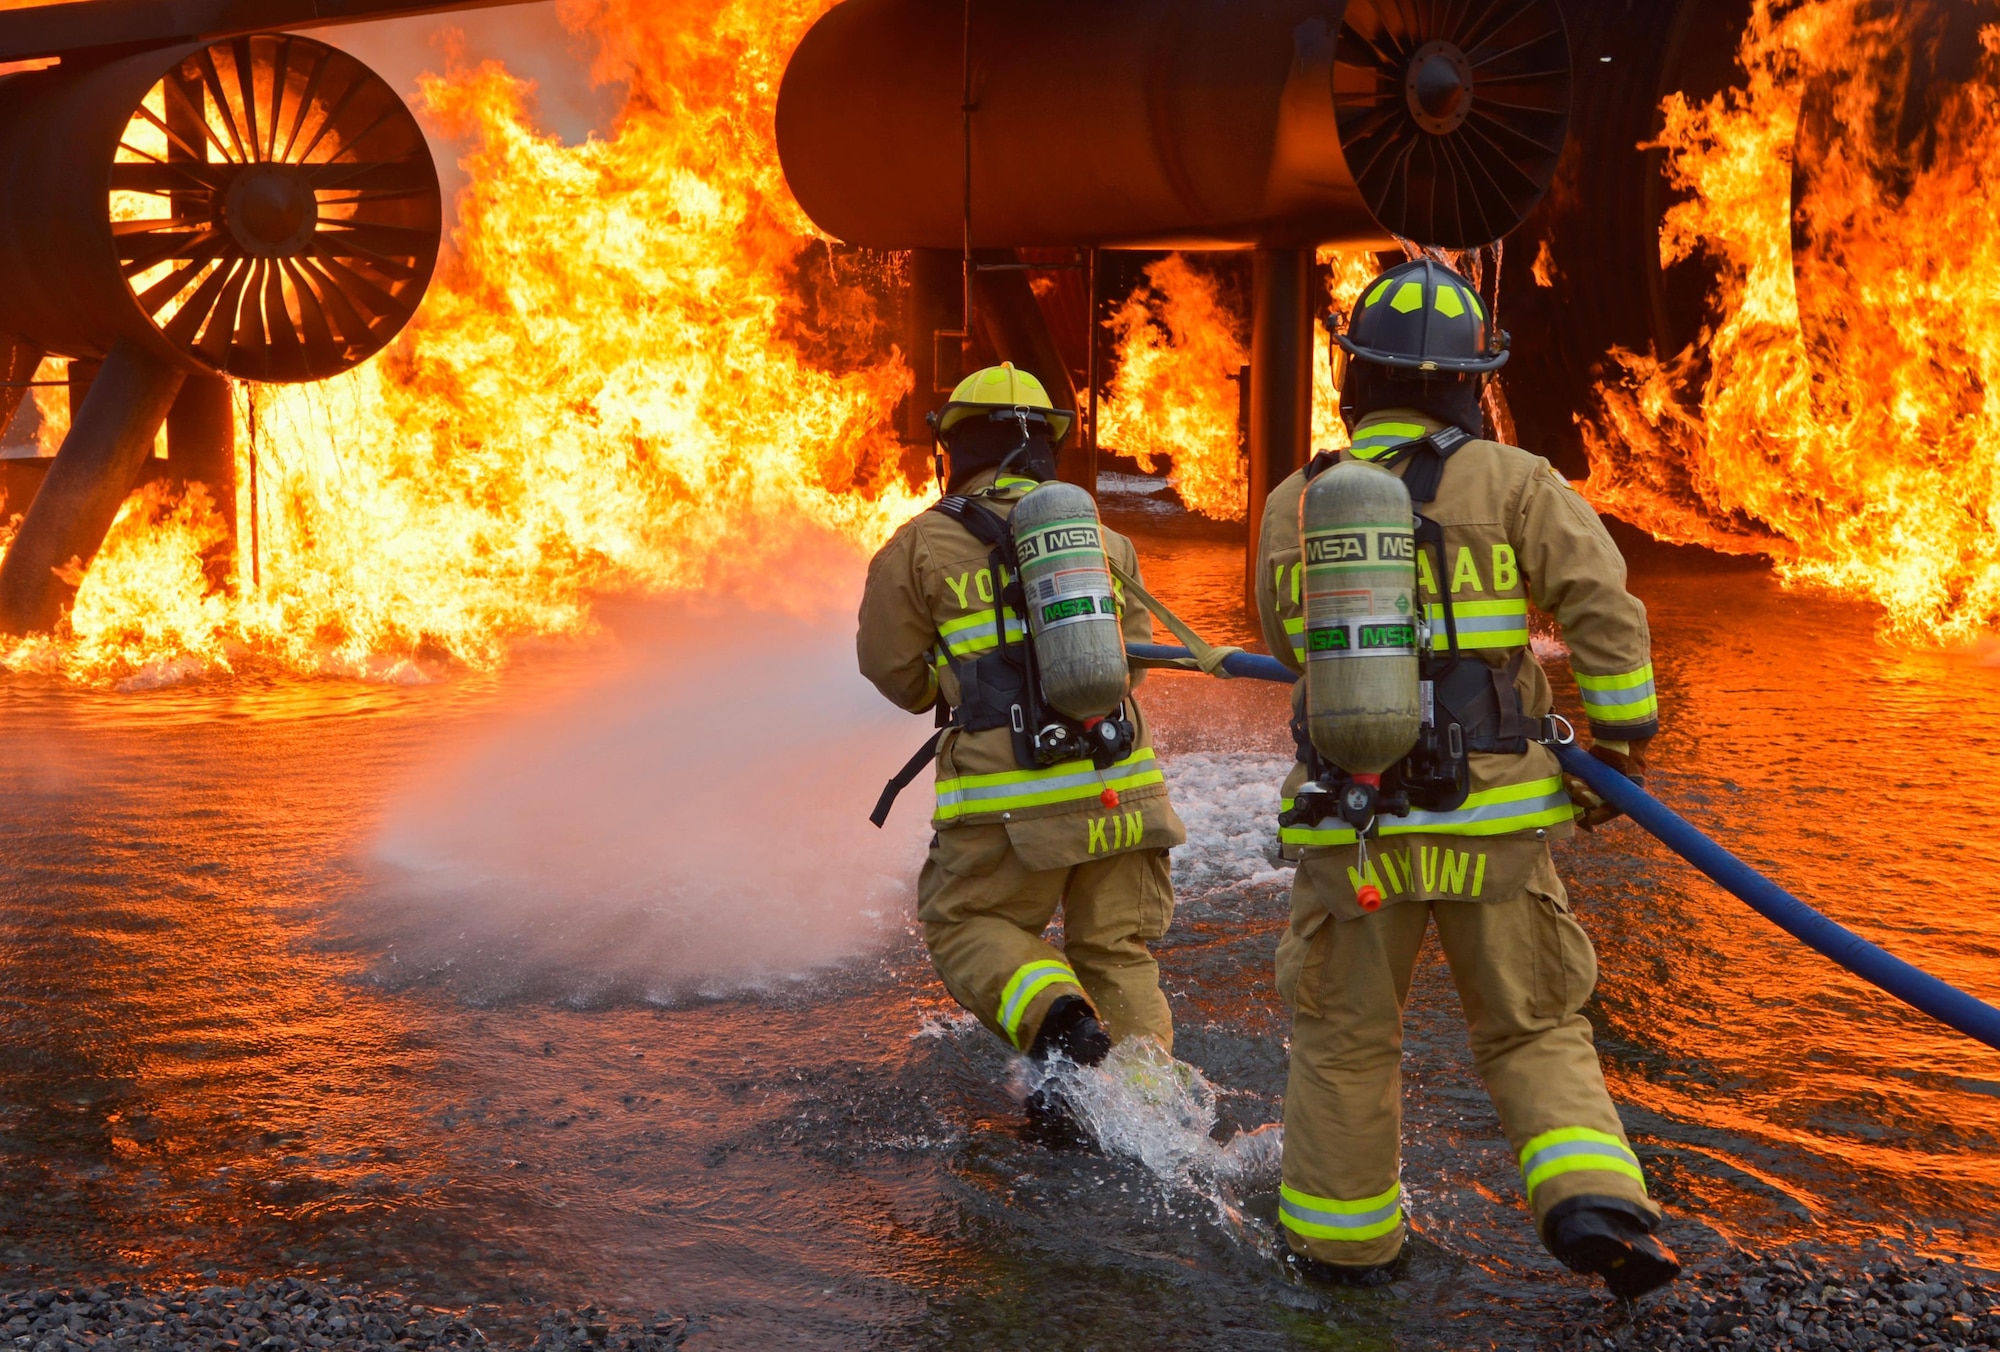 Two firefighters with the 374th Civil Engineer Squadron move towards a simulated aircraft fire during a training scenario at Yokota Air Base, Japan, Dec. 14, 2016. The training helped the firefighters gain experience and build cohesiveness to work as a better team for potential real-world scenarios. (U.S. Air Force photo by Staff Sgt. David Owsianka)